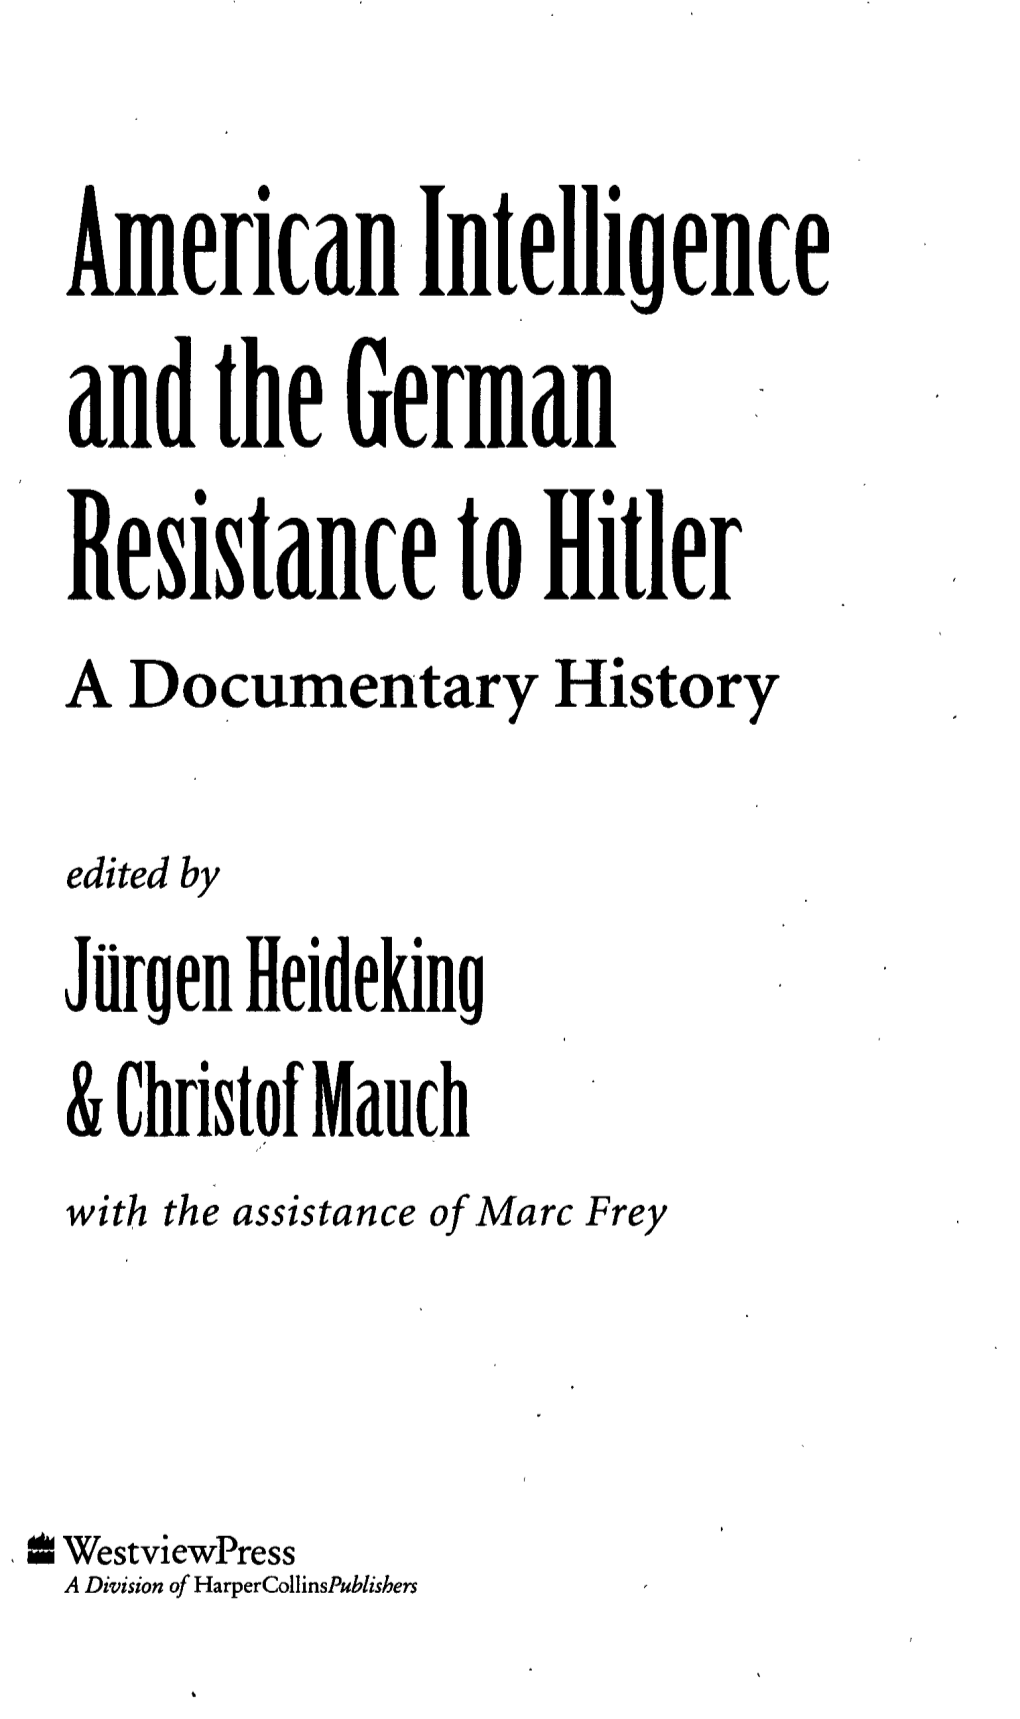 American Intelligence and the German Resistance to Hitler a Documentary History